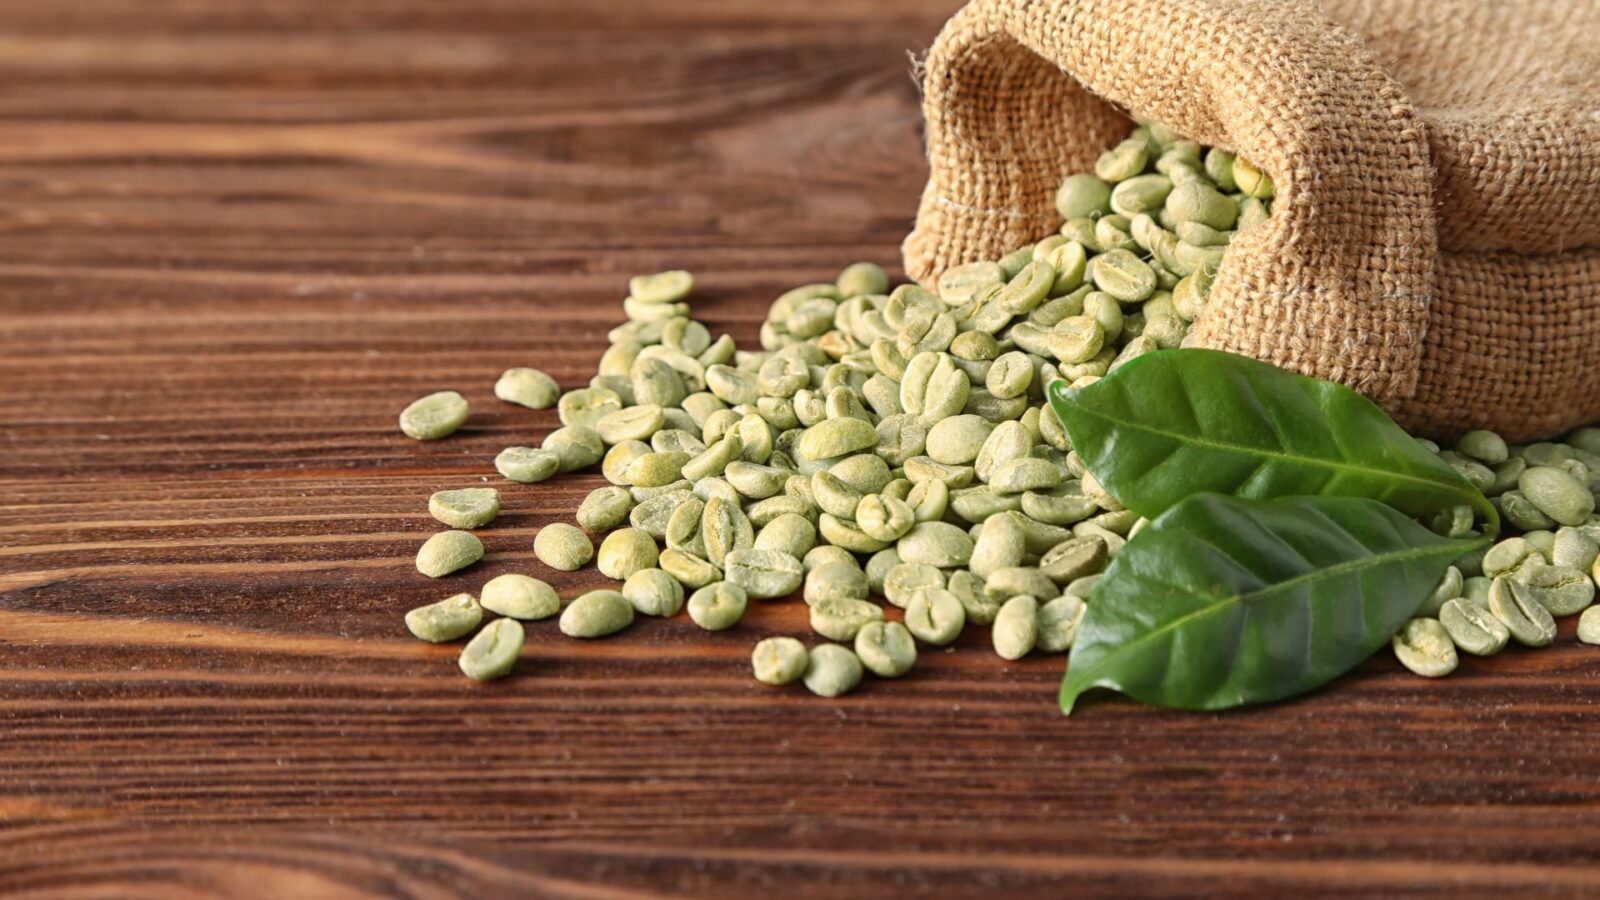 4 requirements to store green coffee beans properly